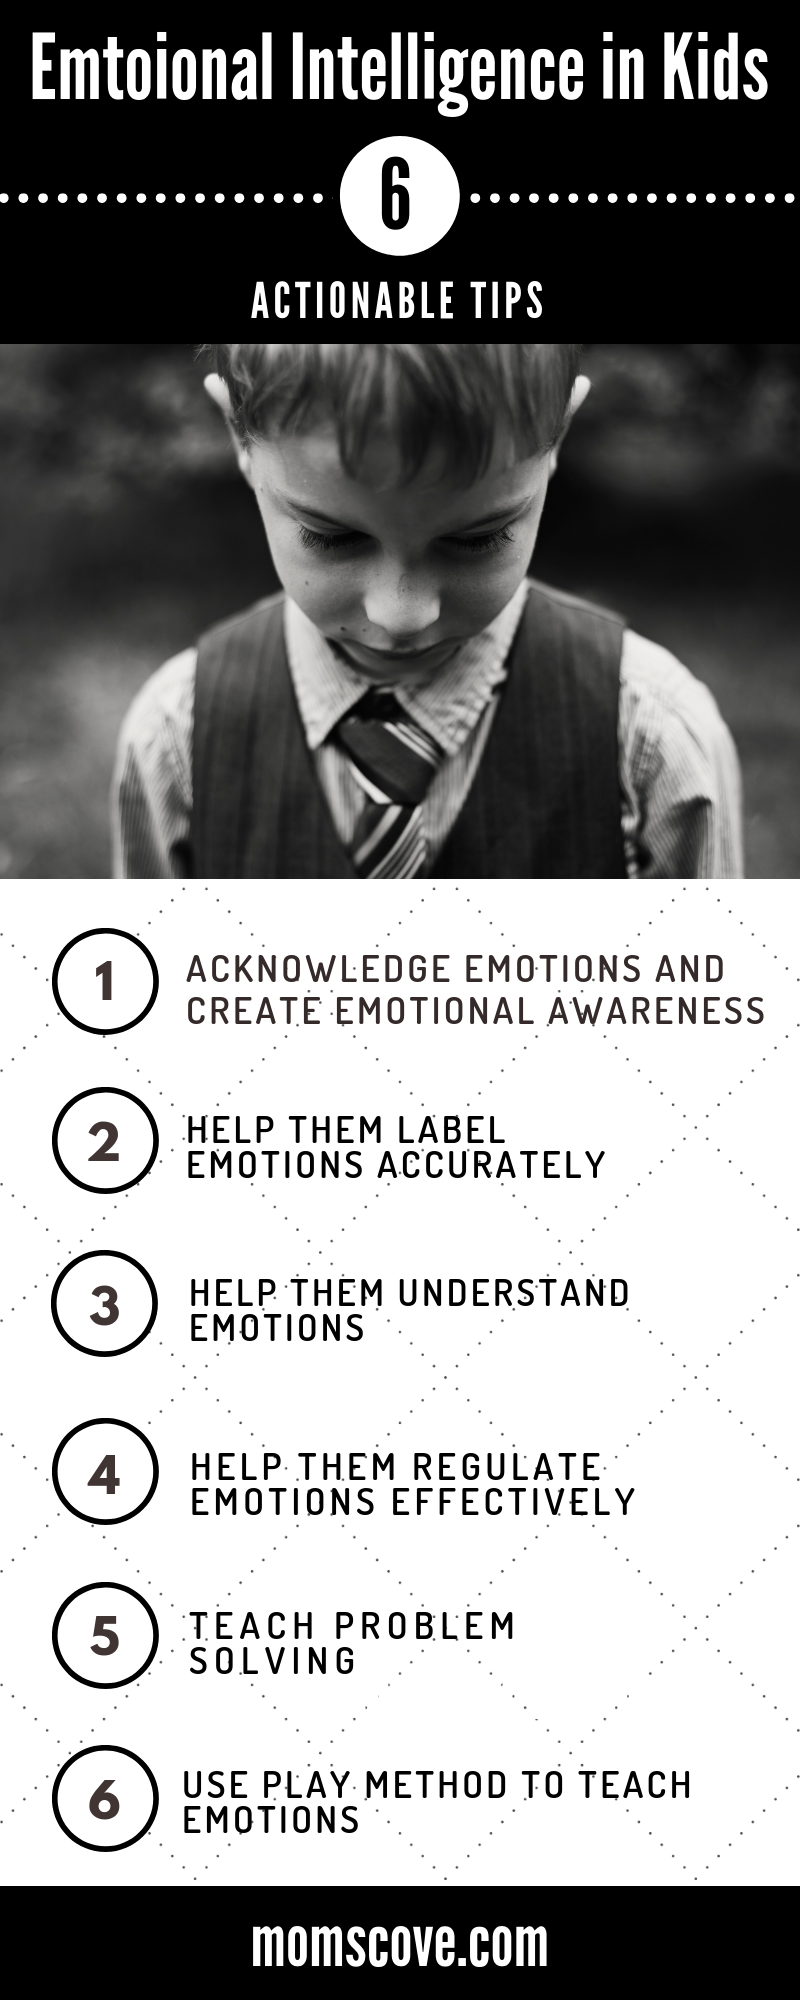 6 Actionable Tips to Increase Emotional Intelligence in Kids Infographic